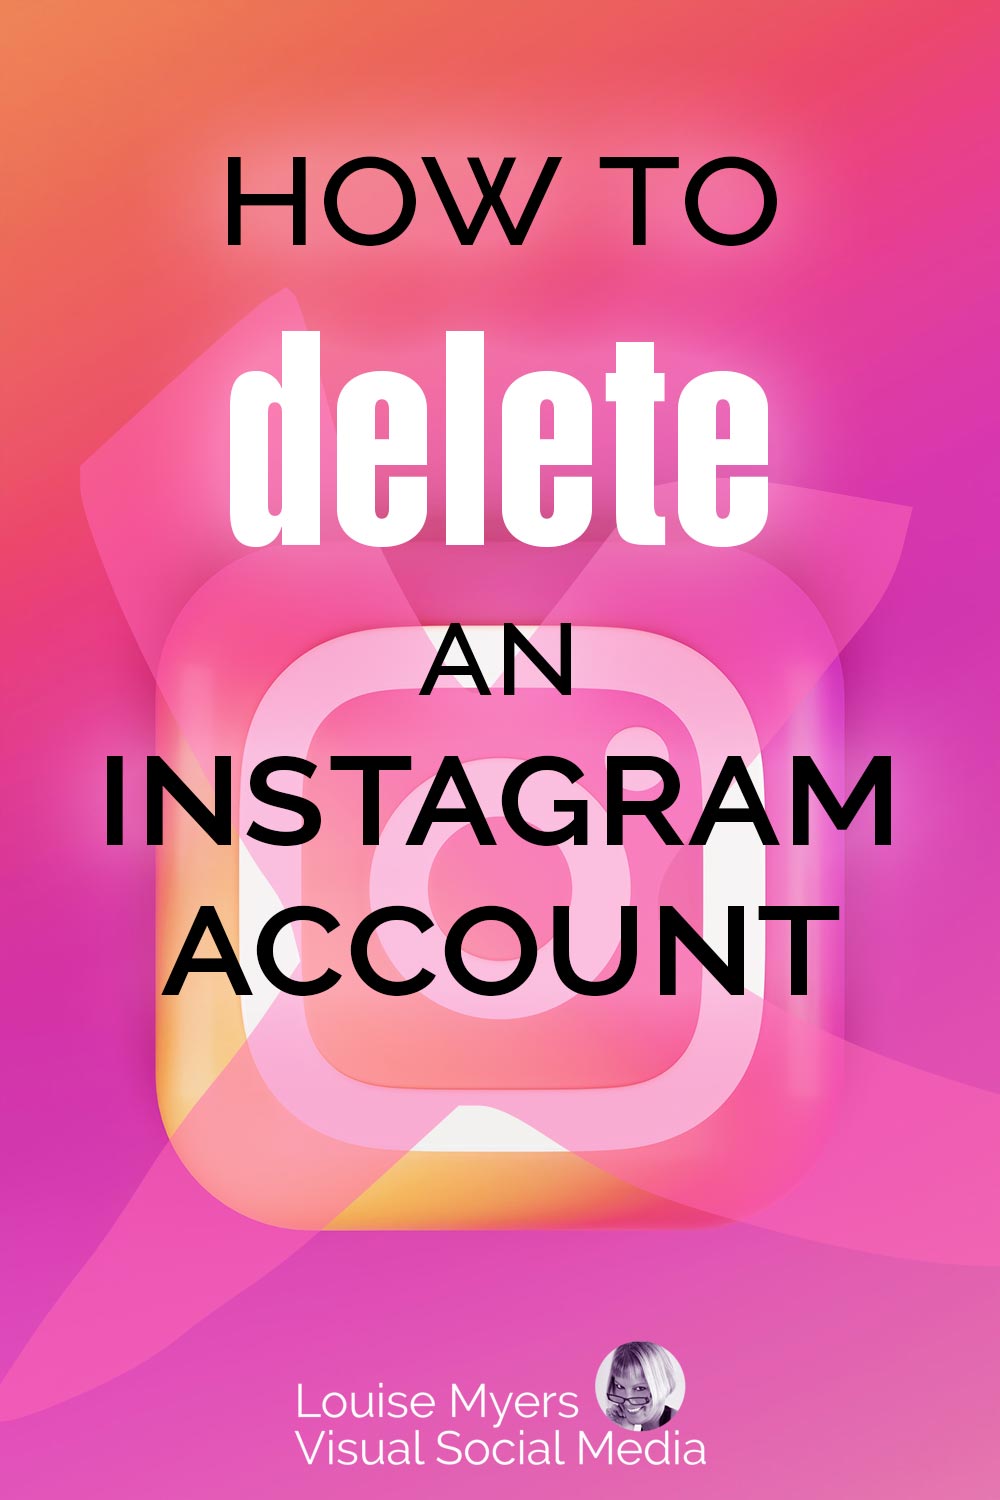 pinnable image says how to delete an Instagram account over exed out IG logo on hot pink background.